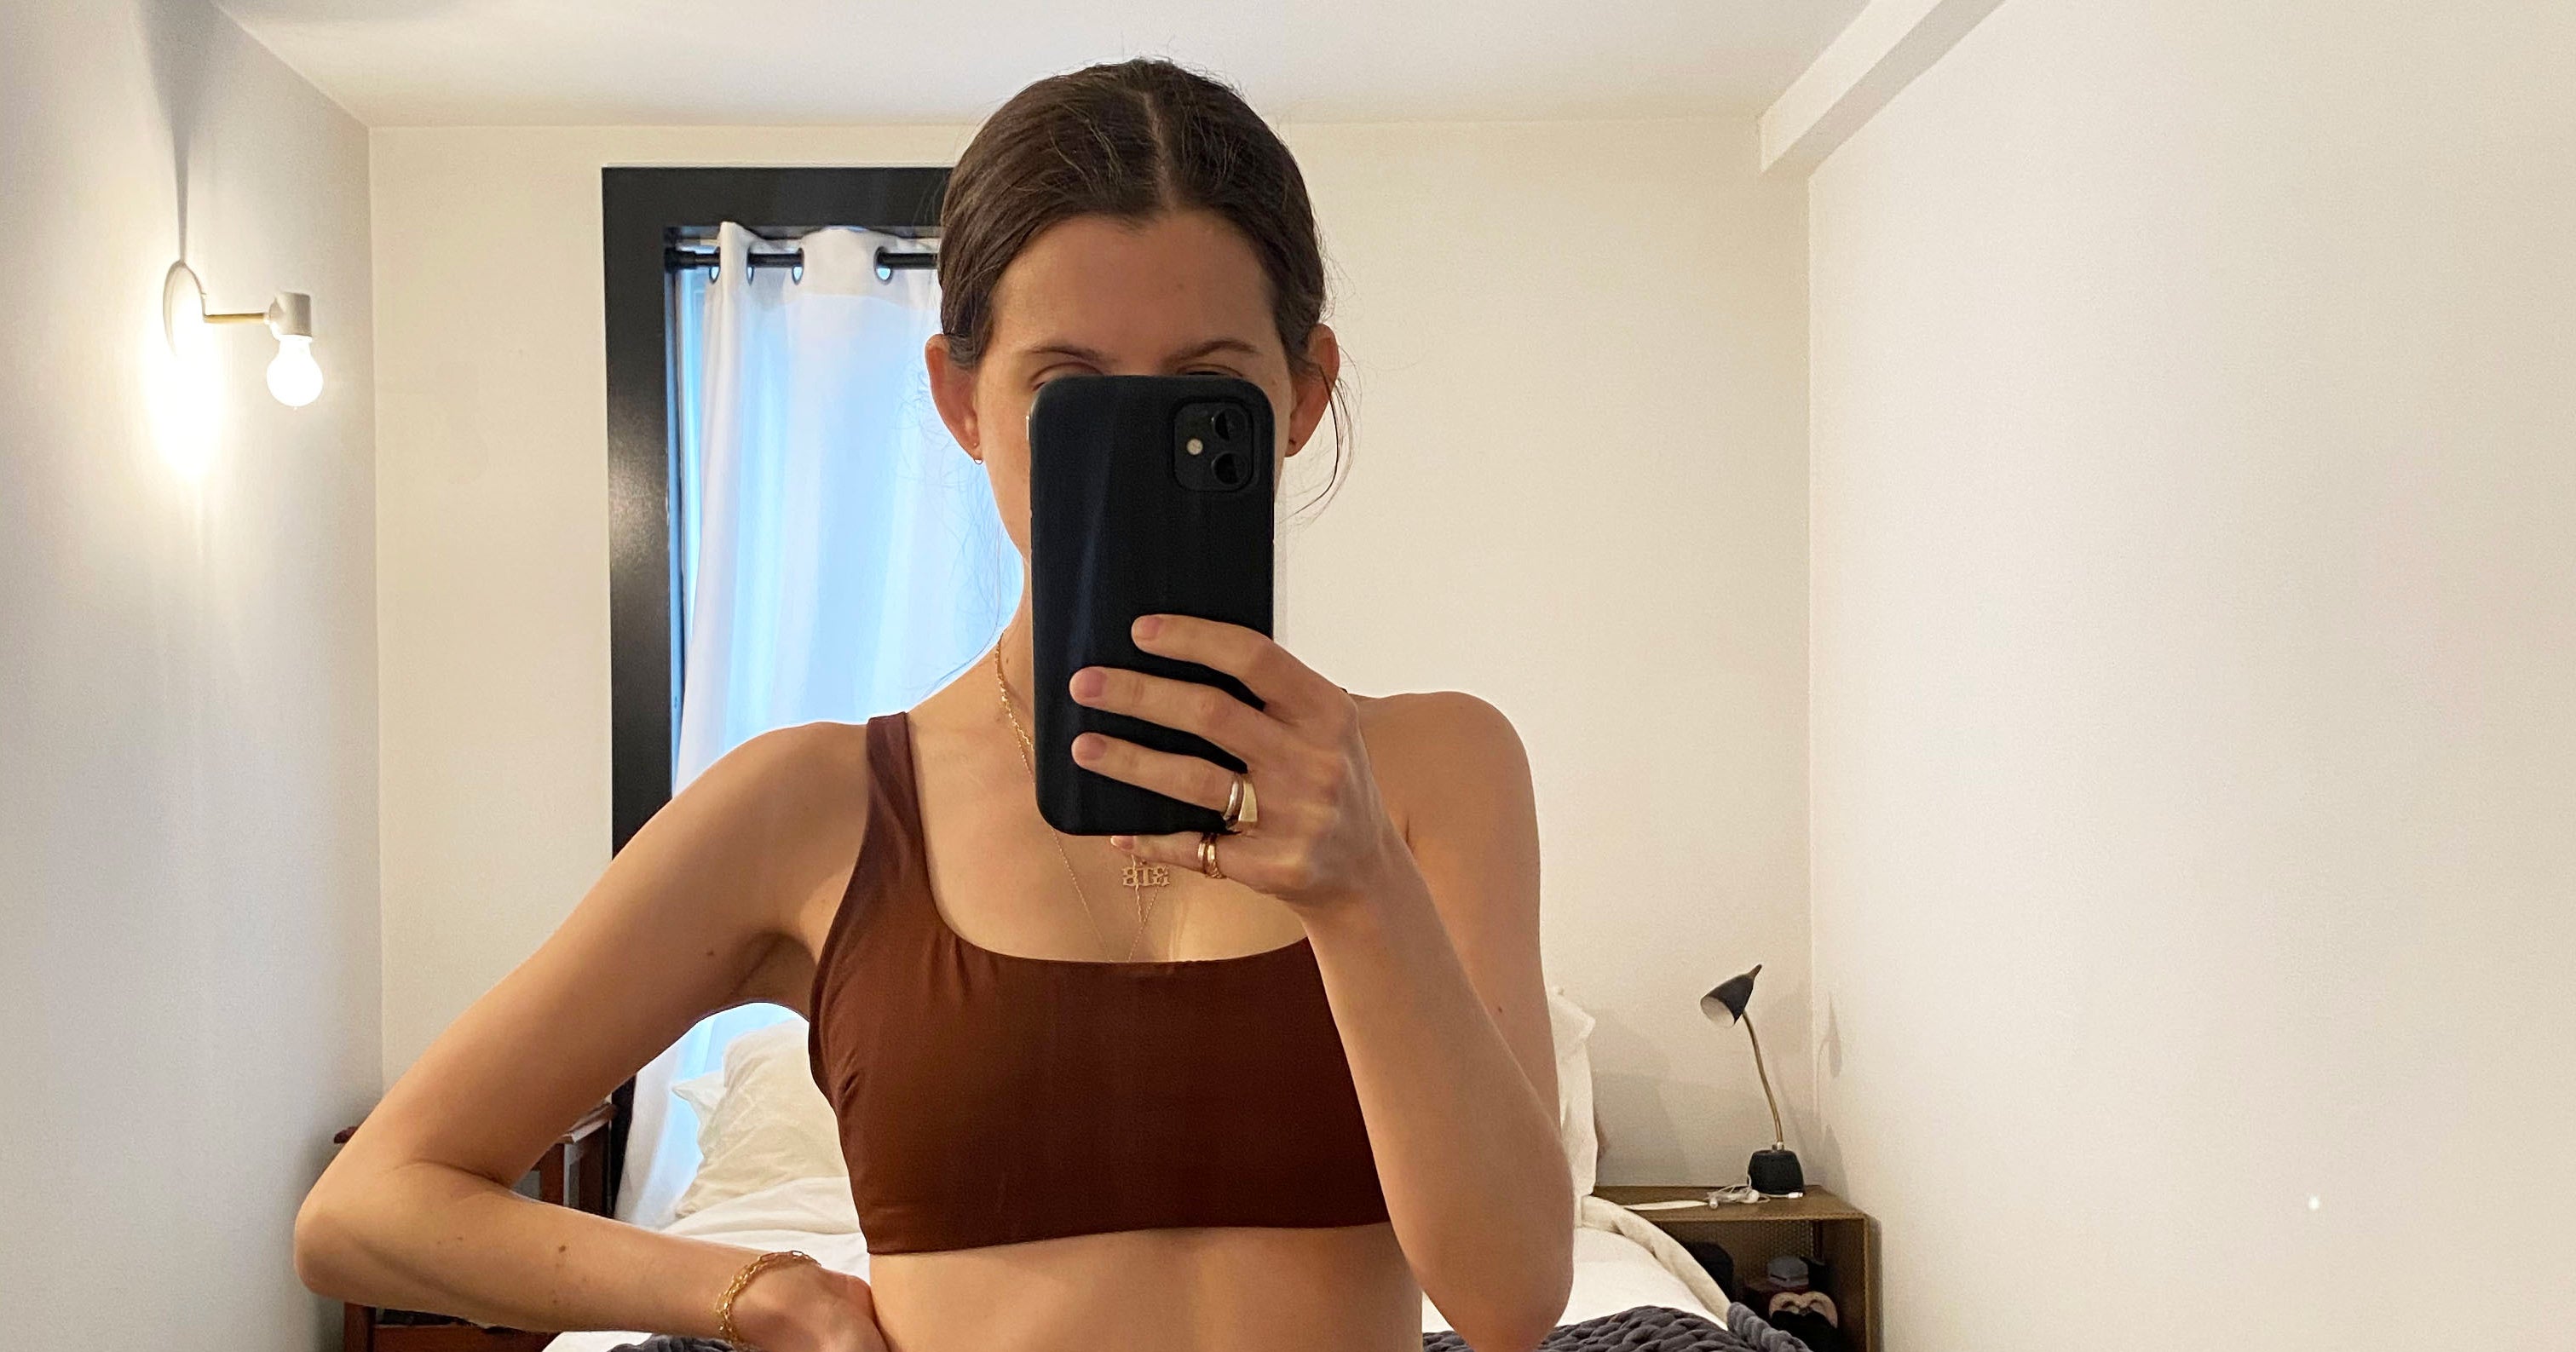 New Everlane Sustainable Swimwear Reviews With Photos